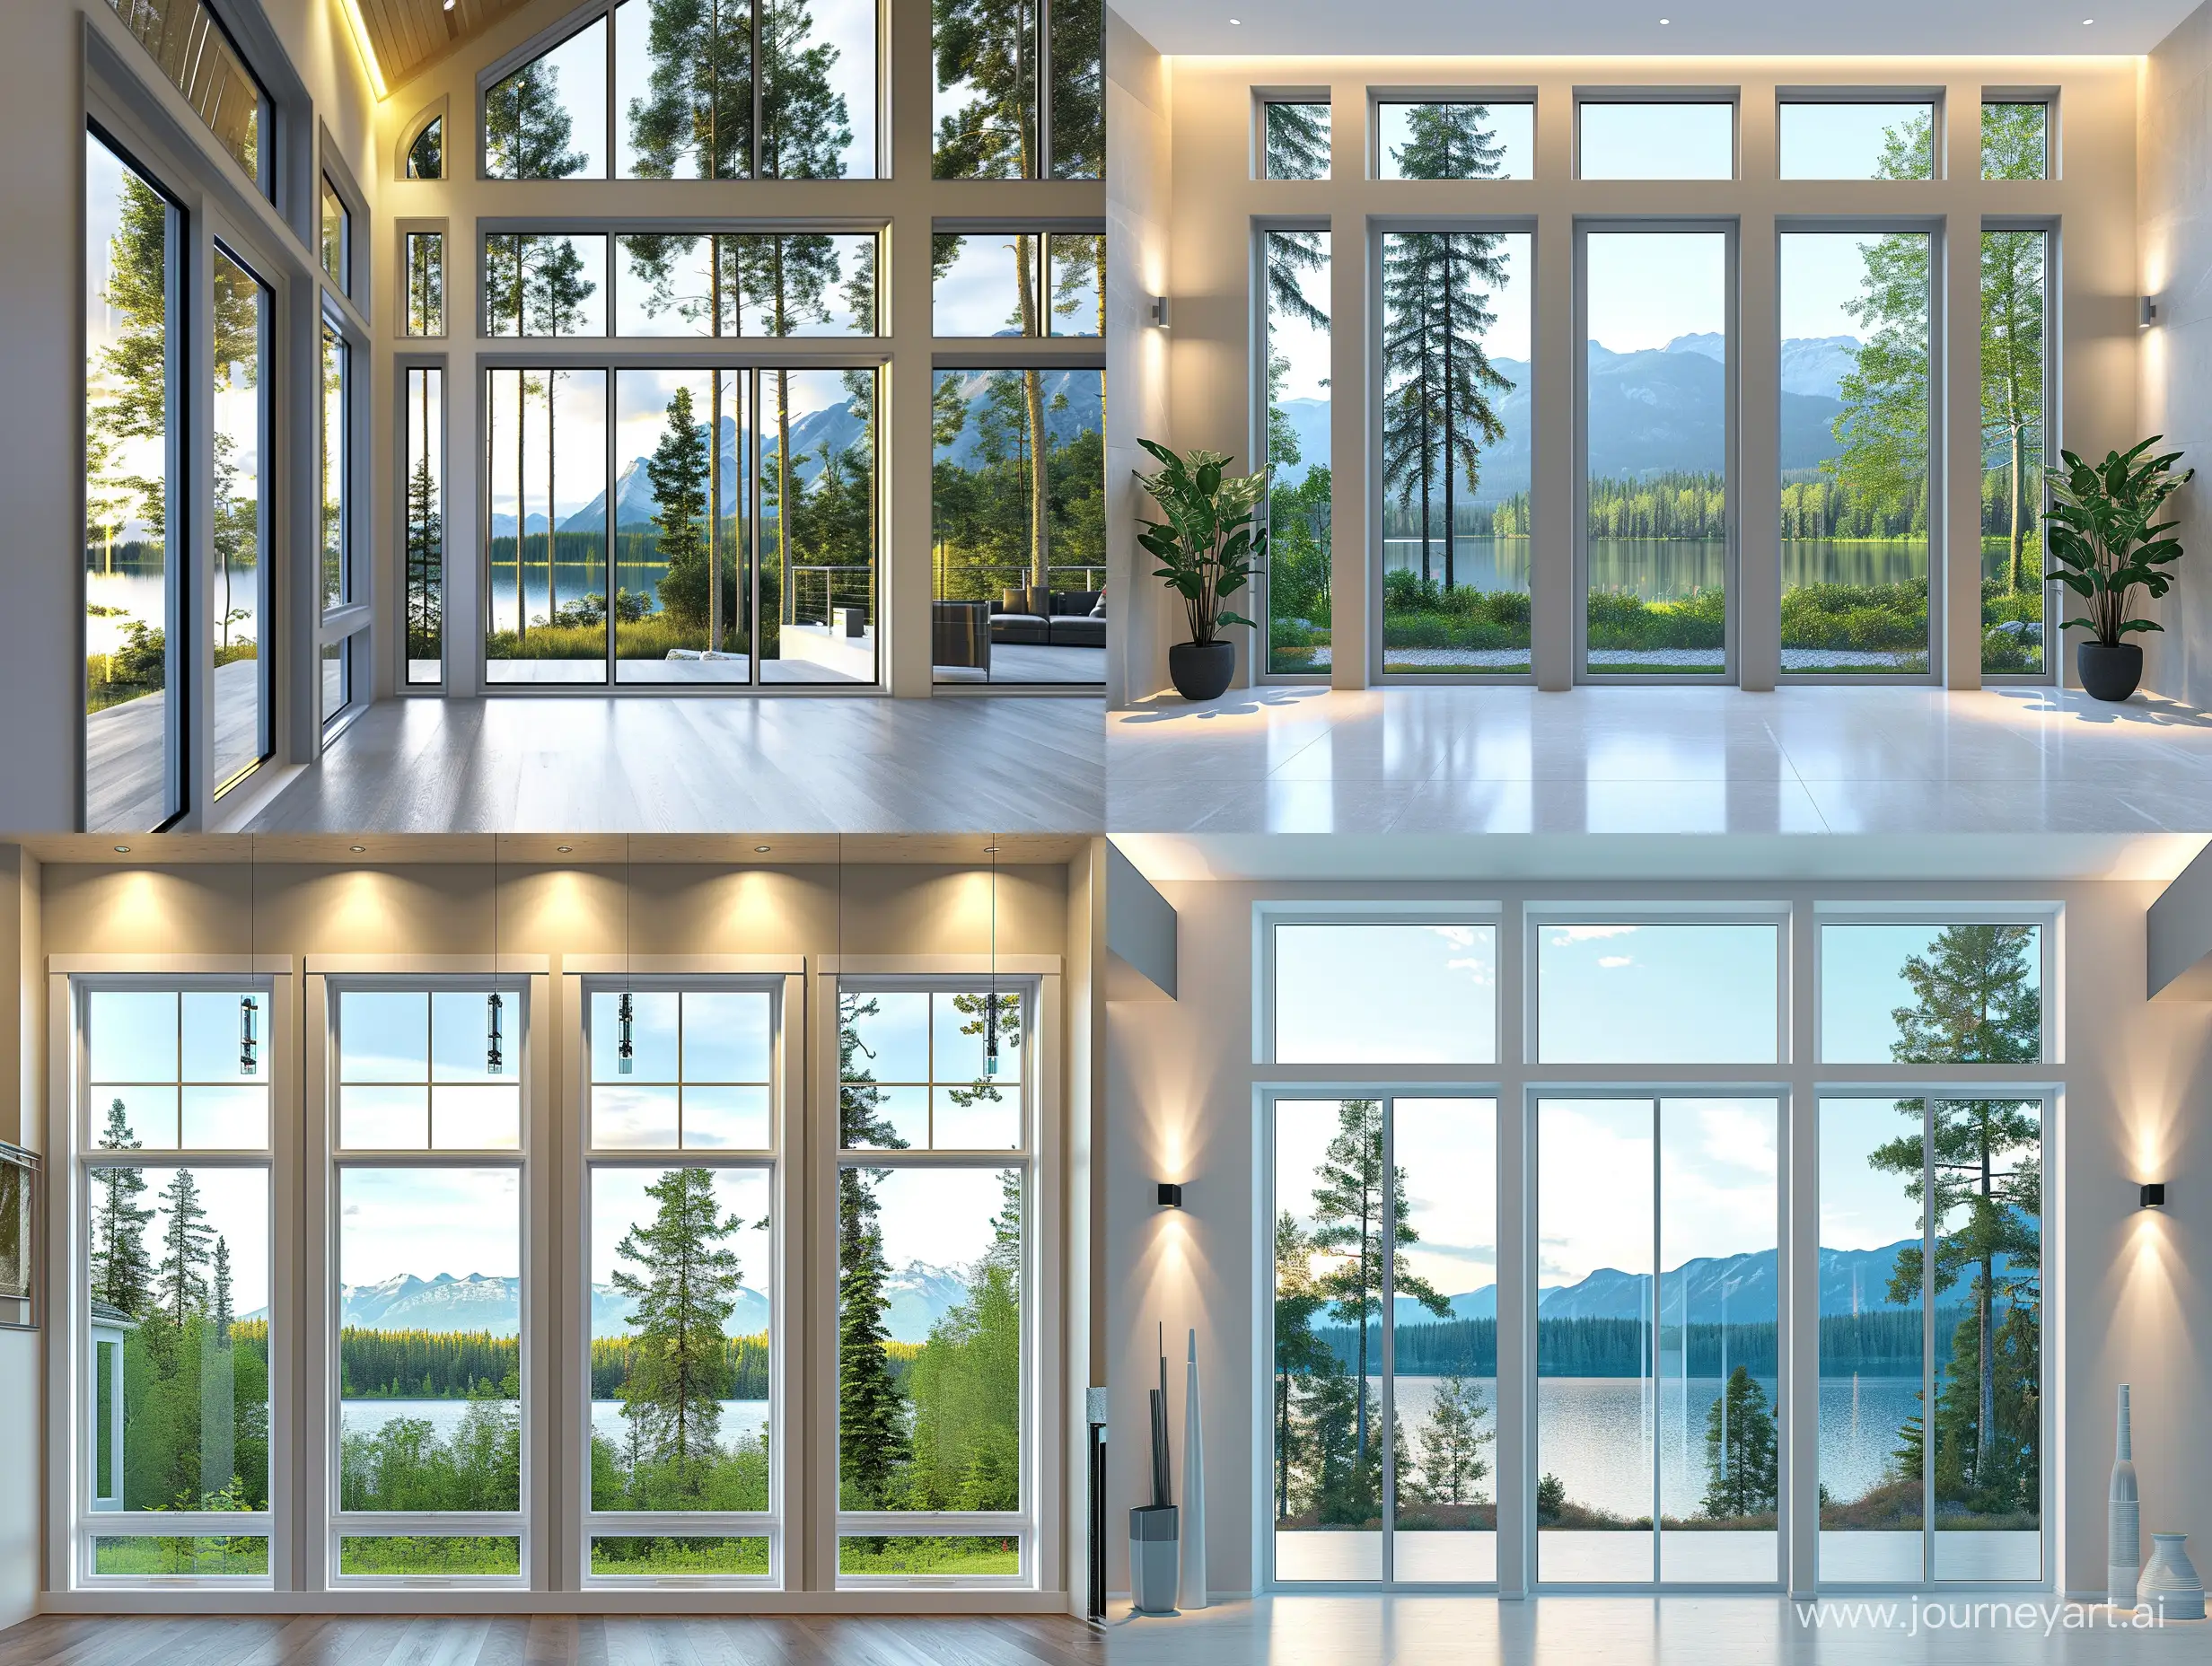 Create an eye-catching featured image for a Canadian windows company, showcasing elegant and modern windows in a contemporary house setting. The image should highlight the sleek design of the windows, emphasizing their clarity, durability, and energy efficiency. Include a view of a serene Canadian landscape through the windows, such as a forest, lake, or mountains, to emphasize the harmony between modern living and natural beauty. The house should be designed with a modern architectural style, featuring clean lines and minimalistic elements. The lighting should be natural and bright, showcasing the windows' ability to enhance indoor lighting. The overall feel of the image should be inviting, luxurious, and representative of high-quality Canadian craftsmanship in window design.